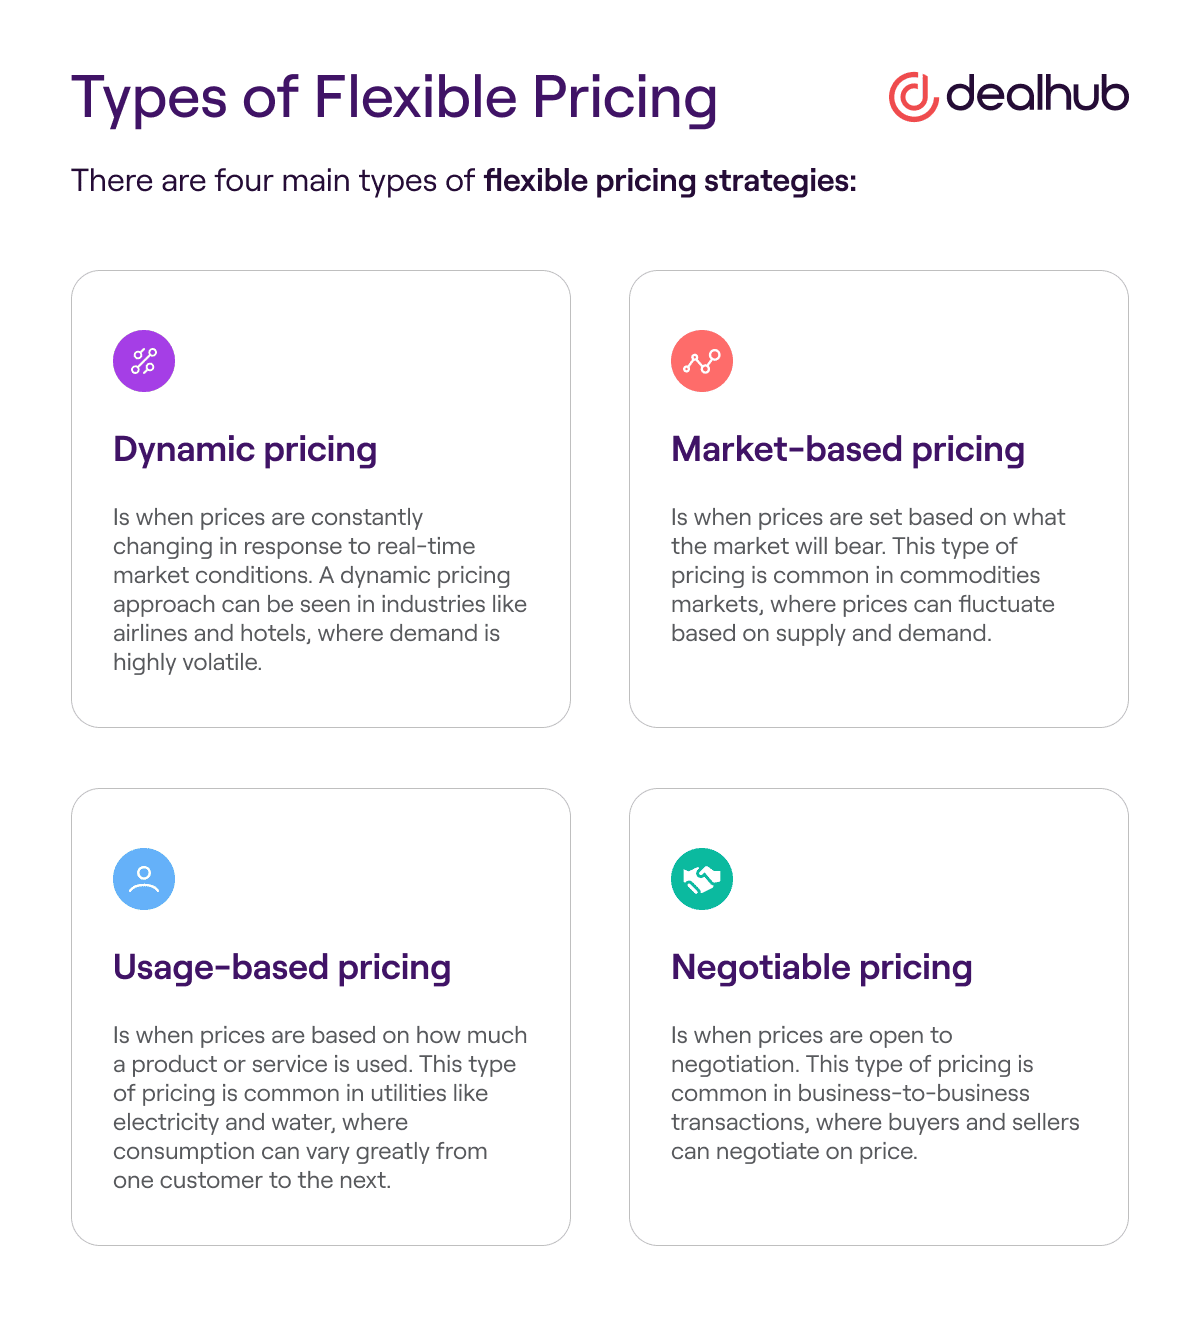 Types of Flexible Pricing